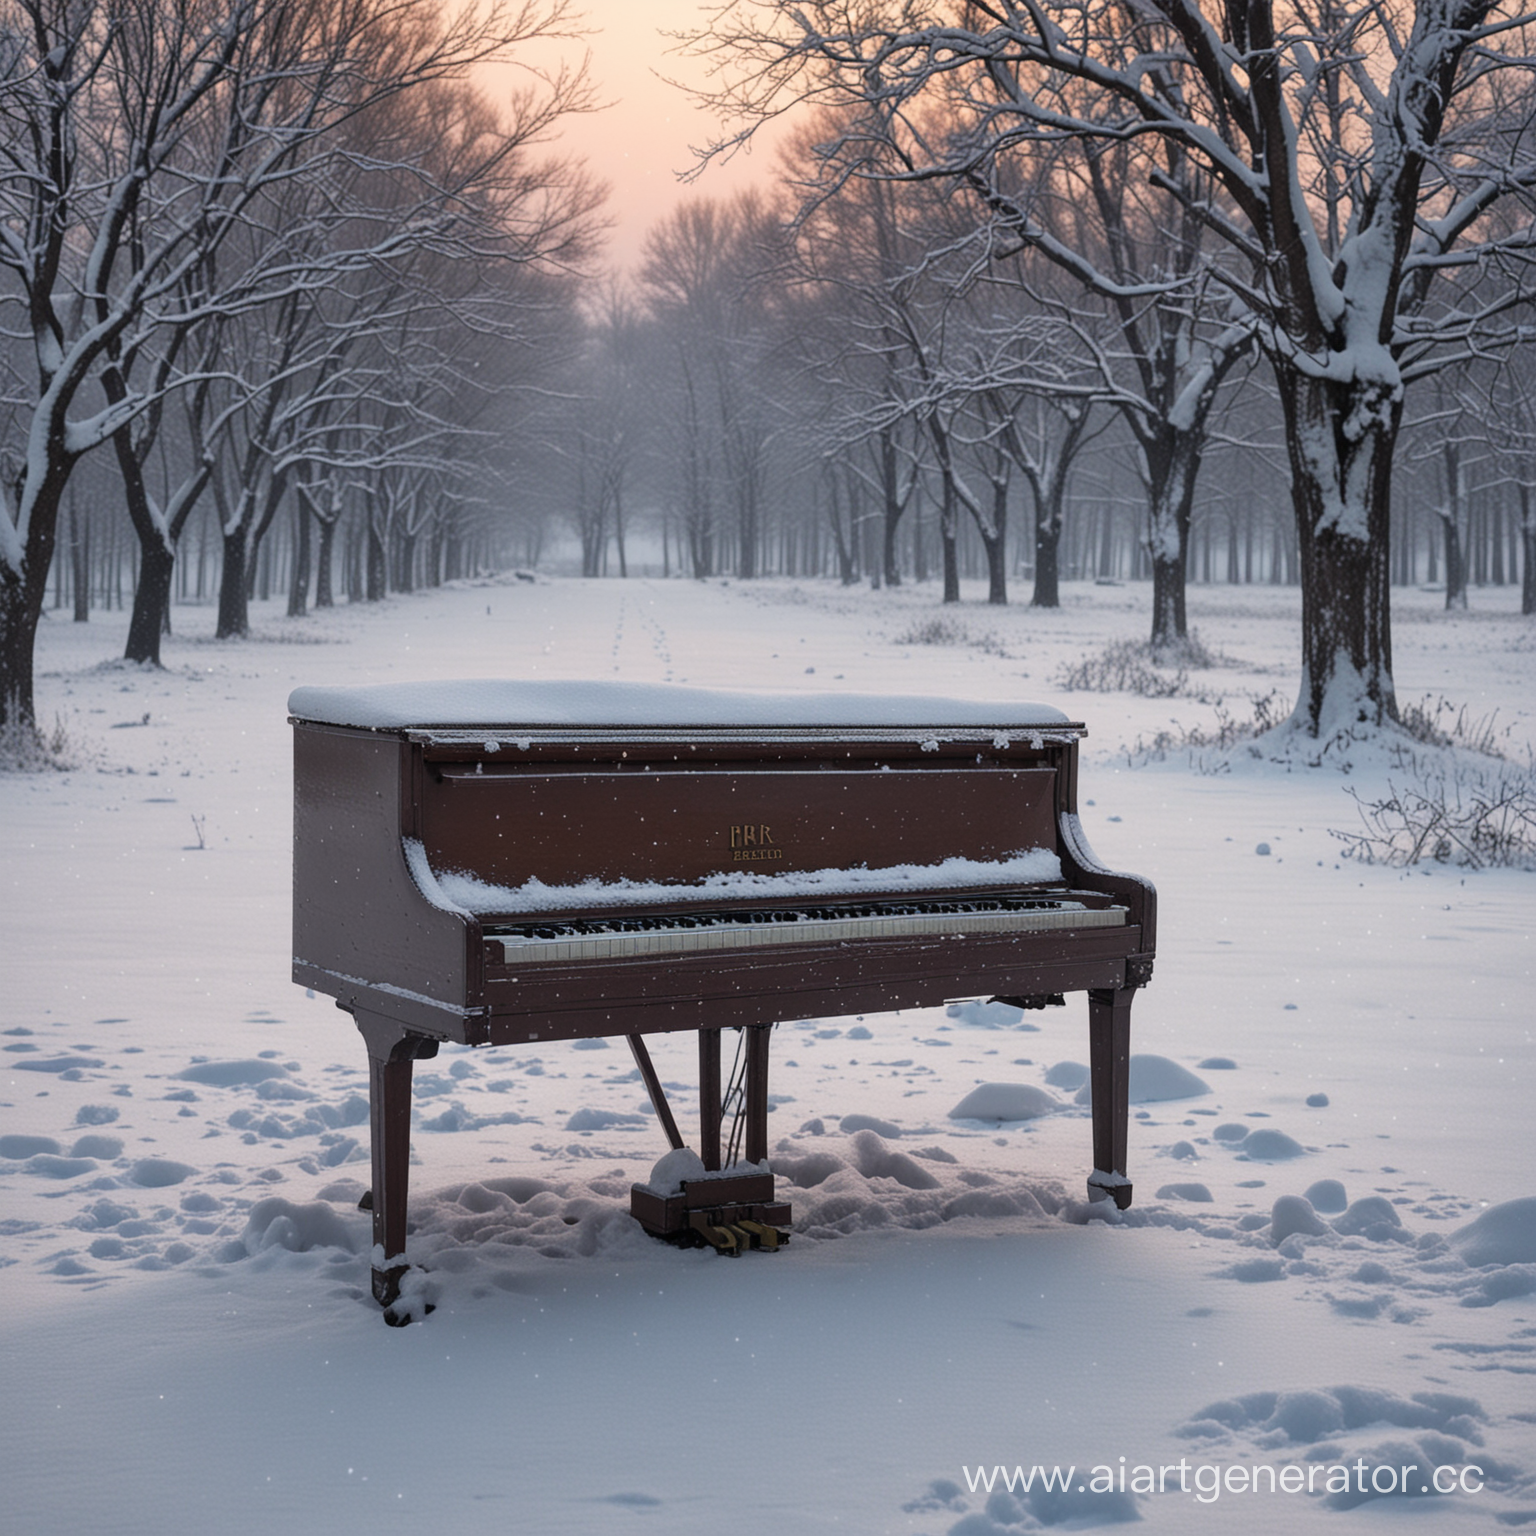 Piano in snow on evening with snowfall
